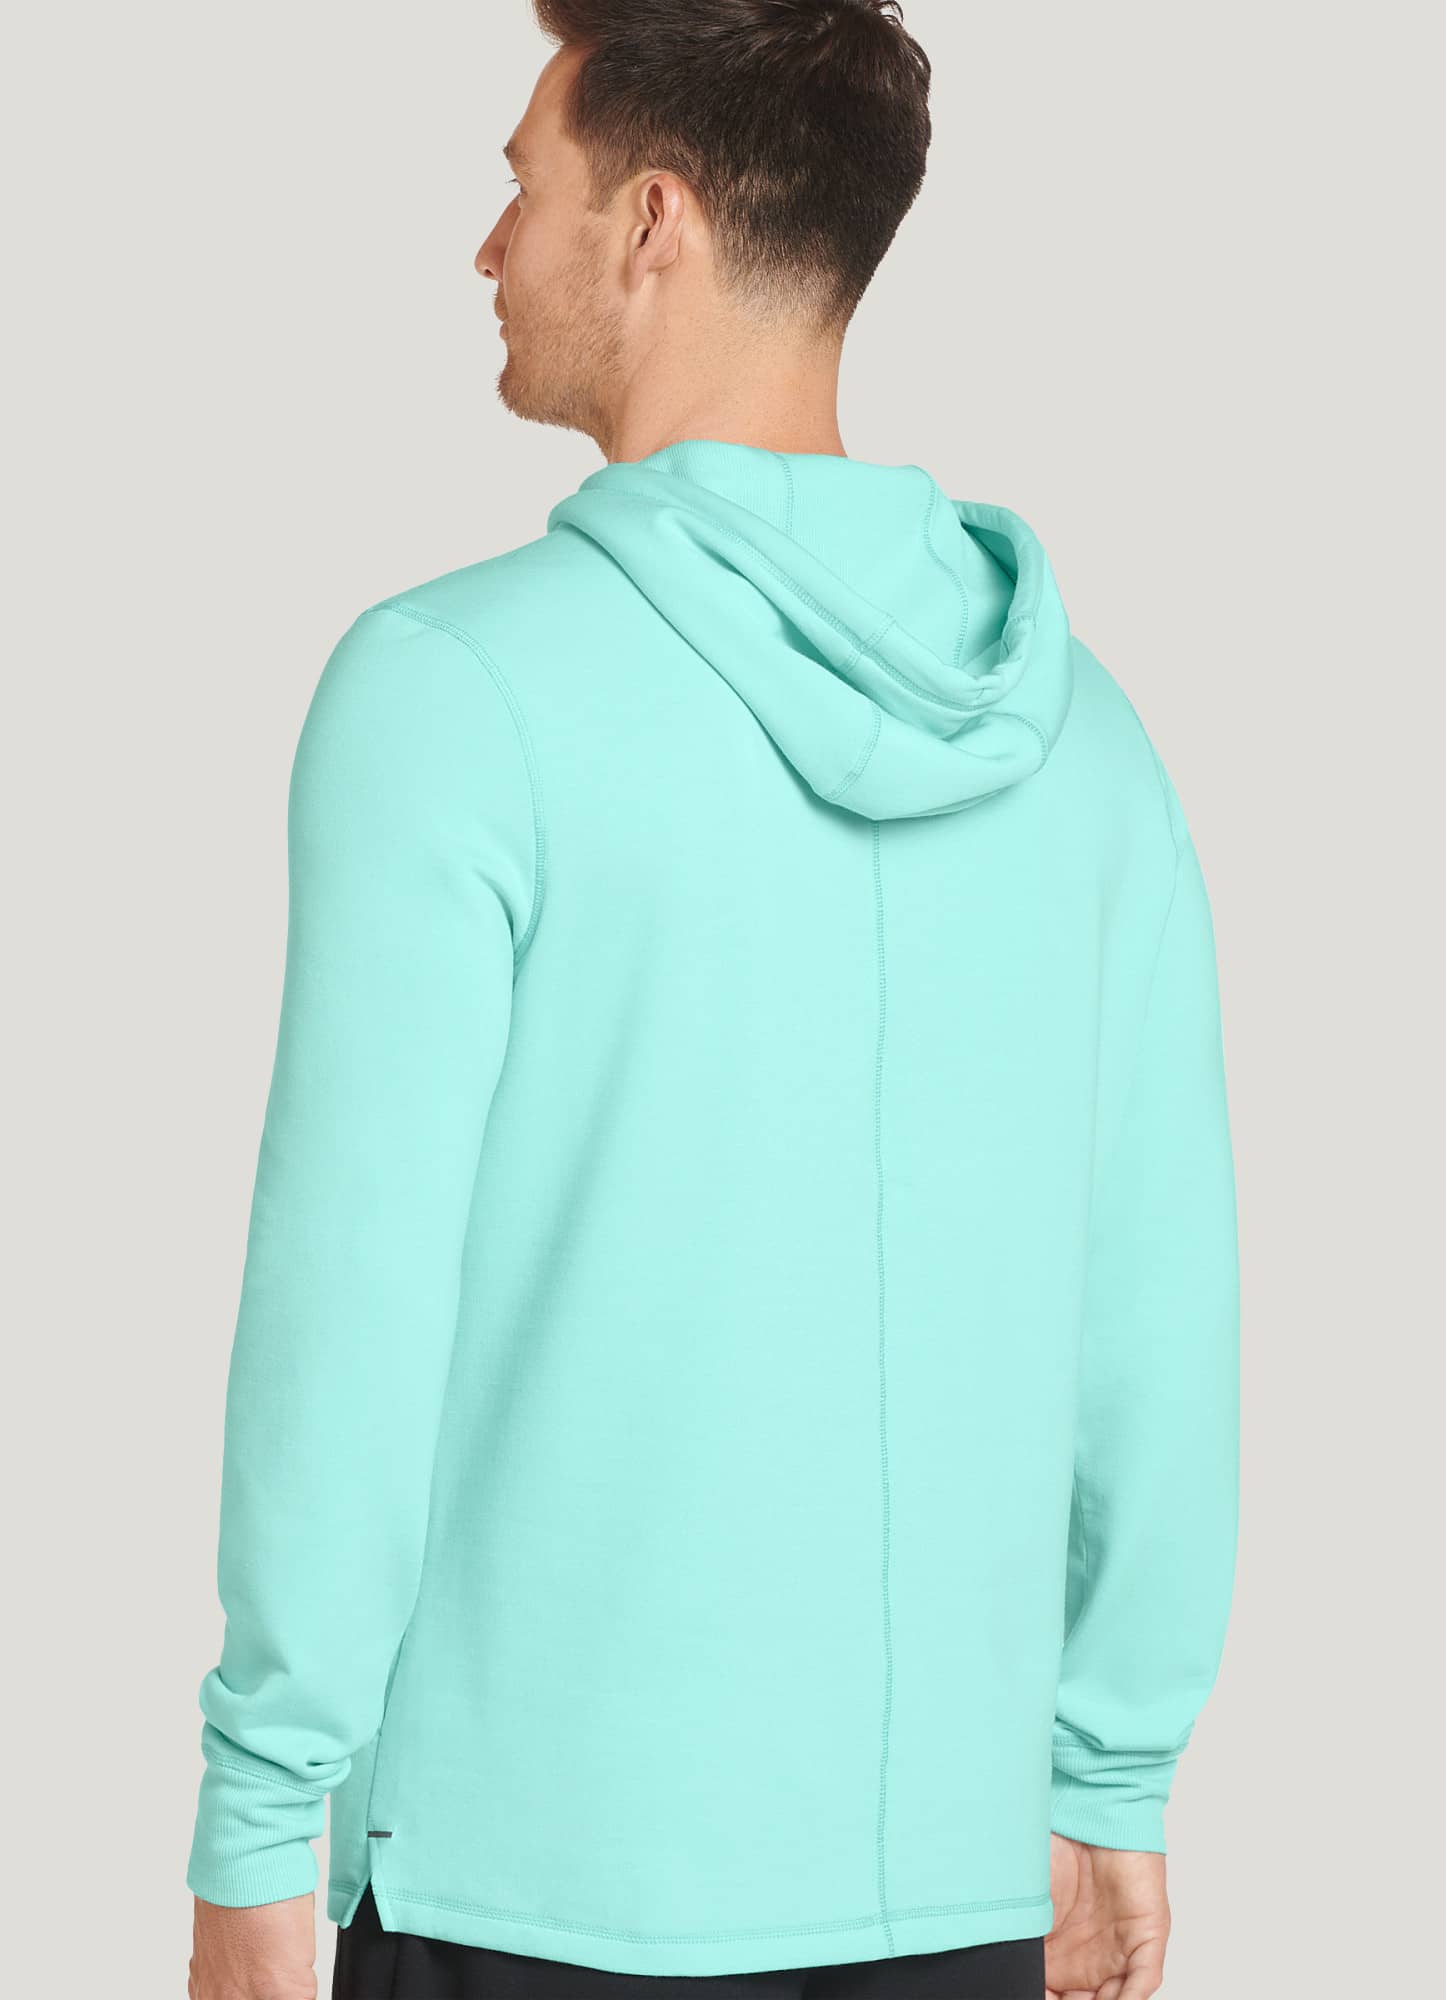 Jockey - Move freely in the Jockey® Relaxed Activewear Hoodie. The